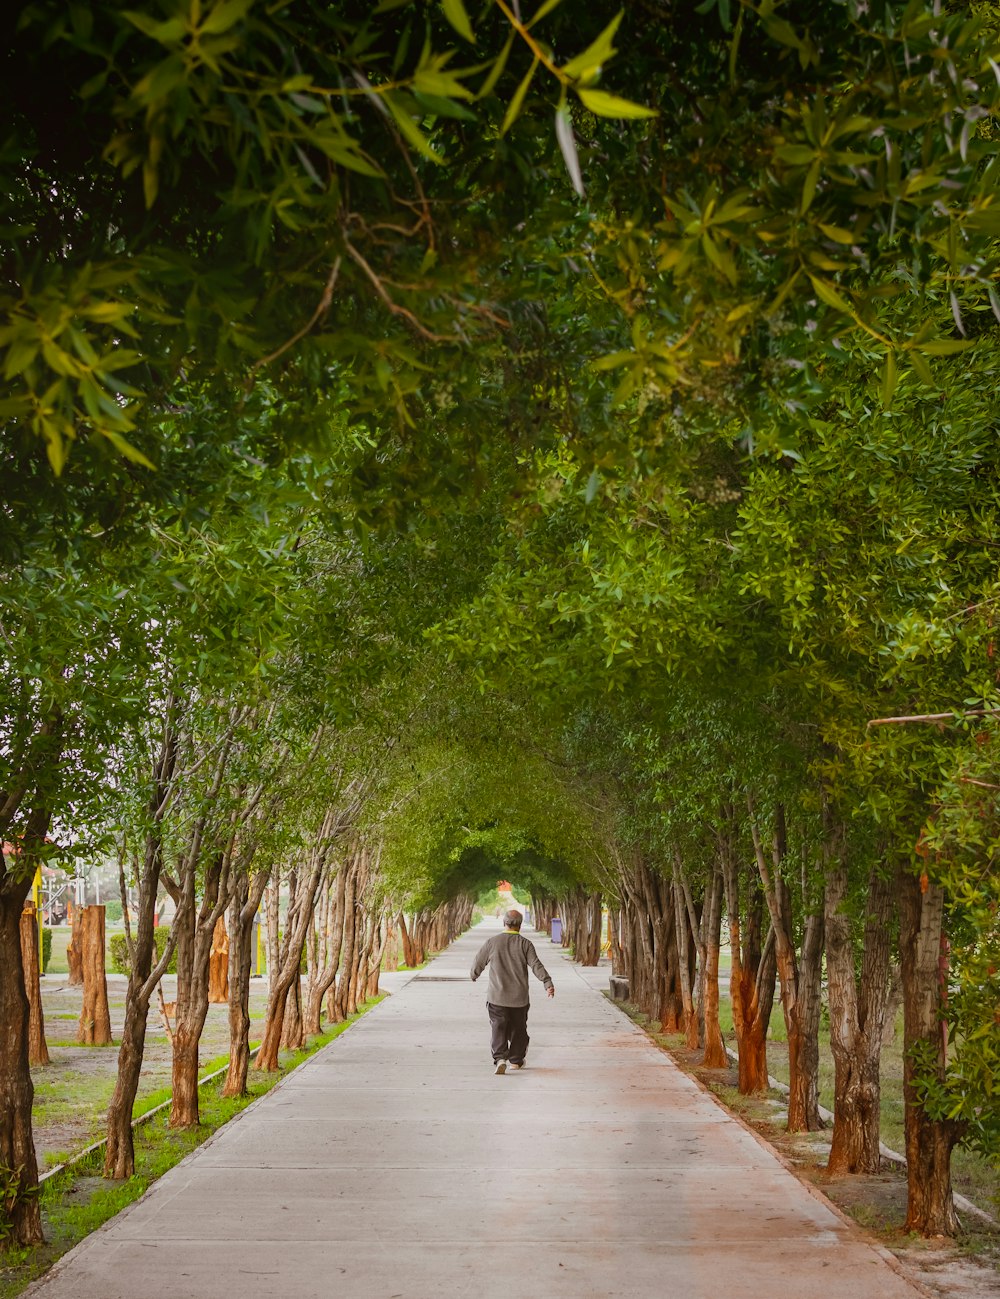 man walking on road in middle of trees during daytime